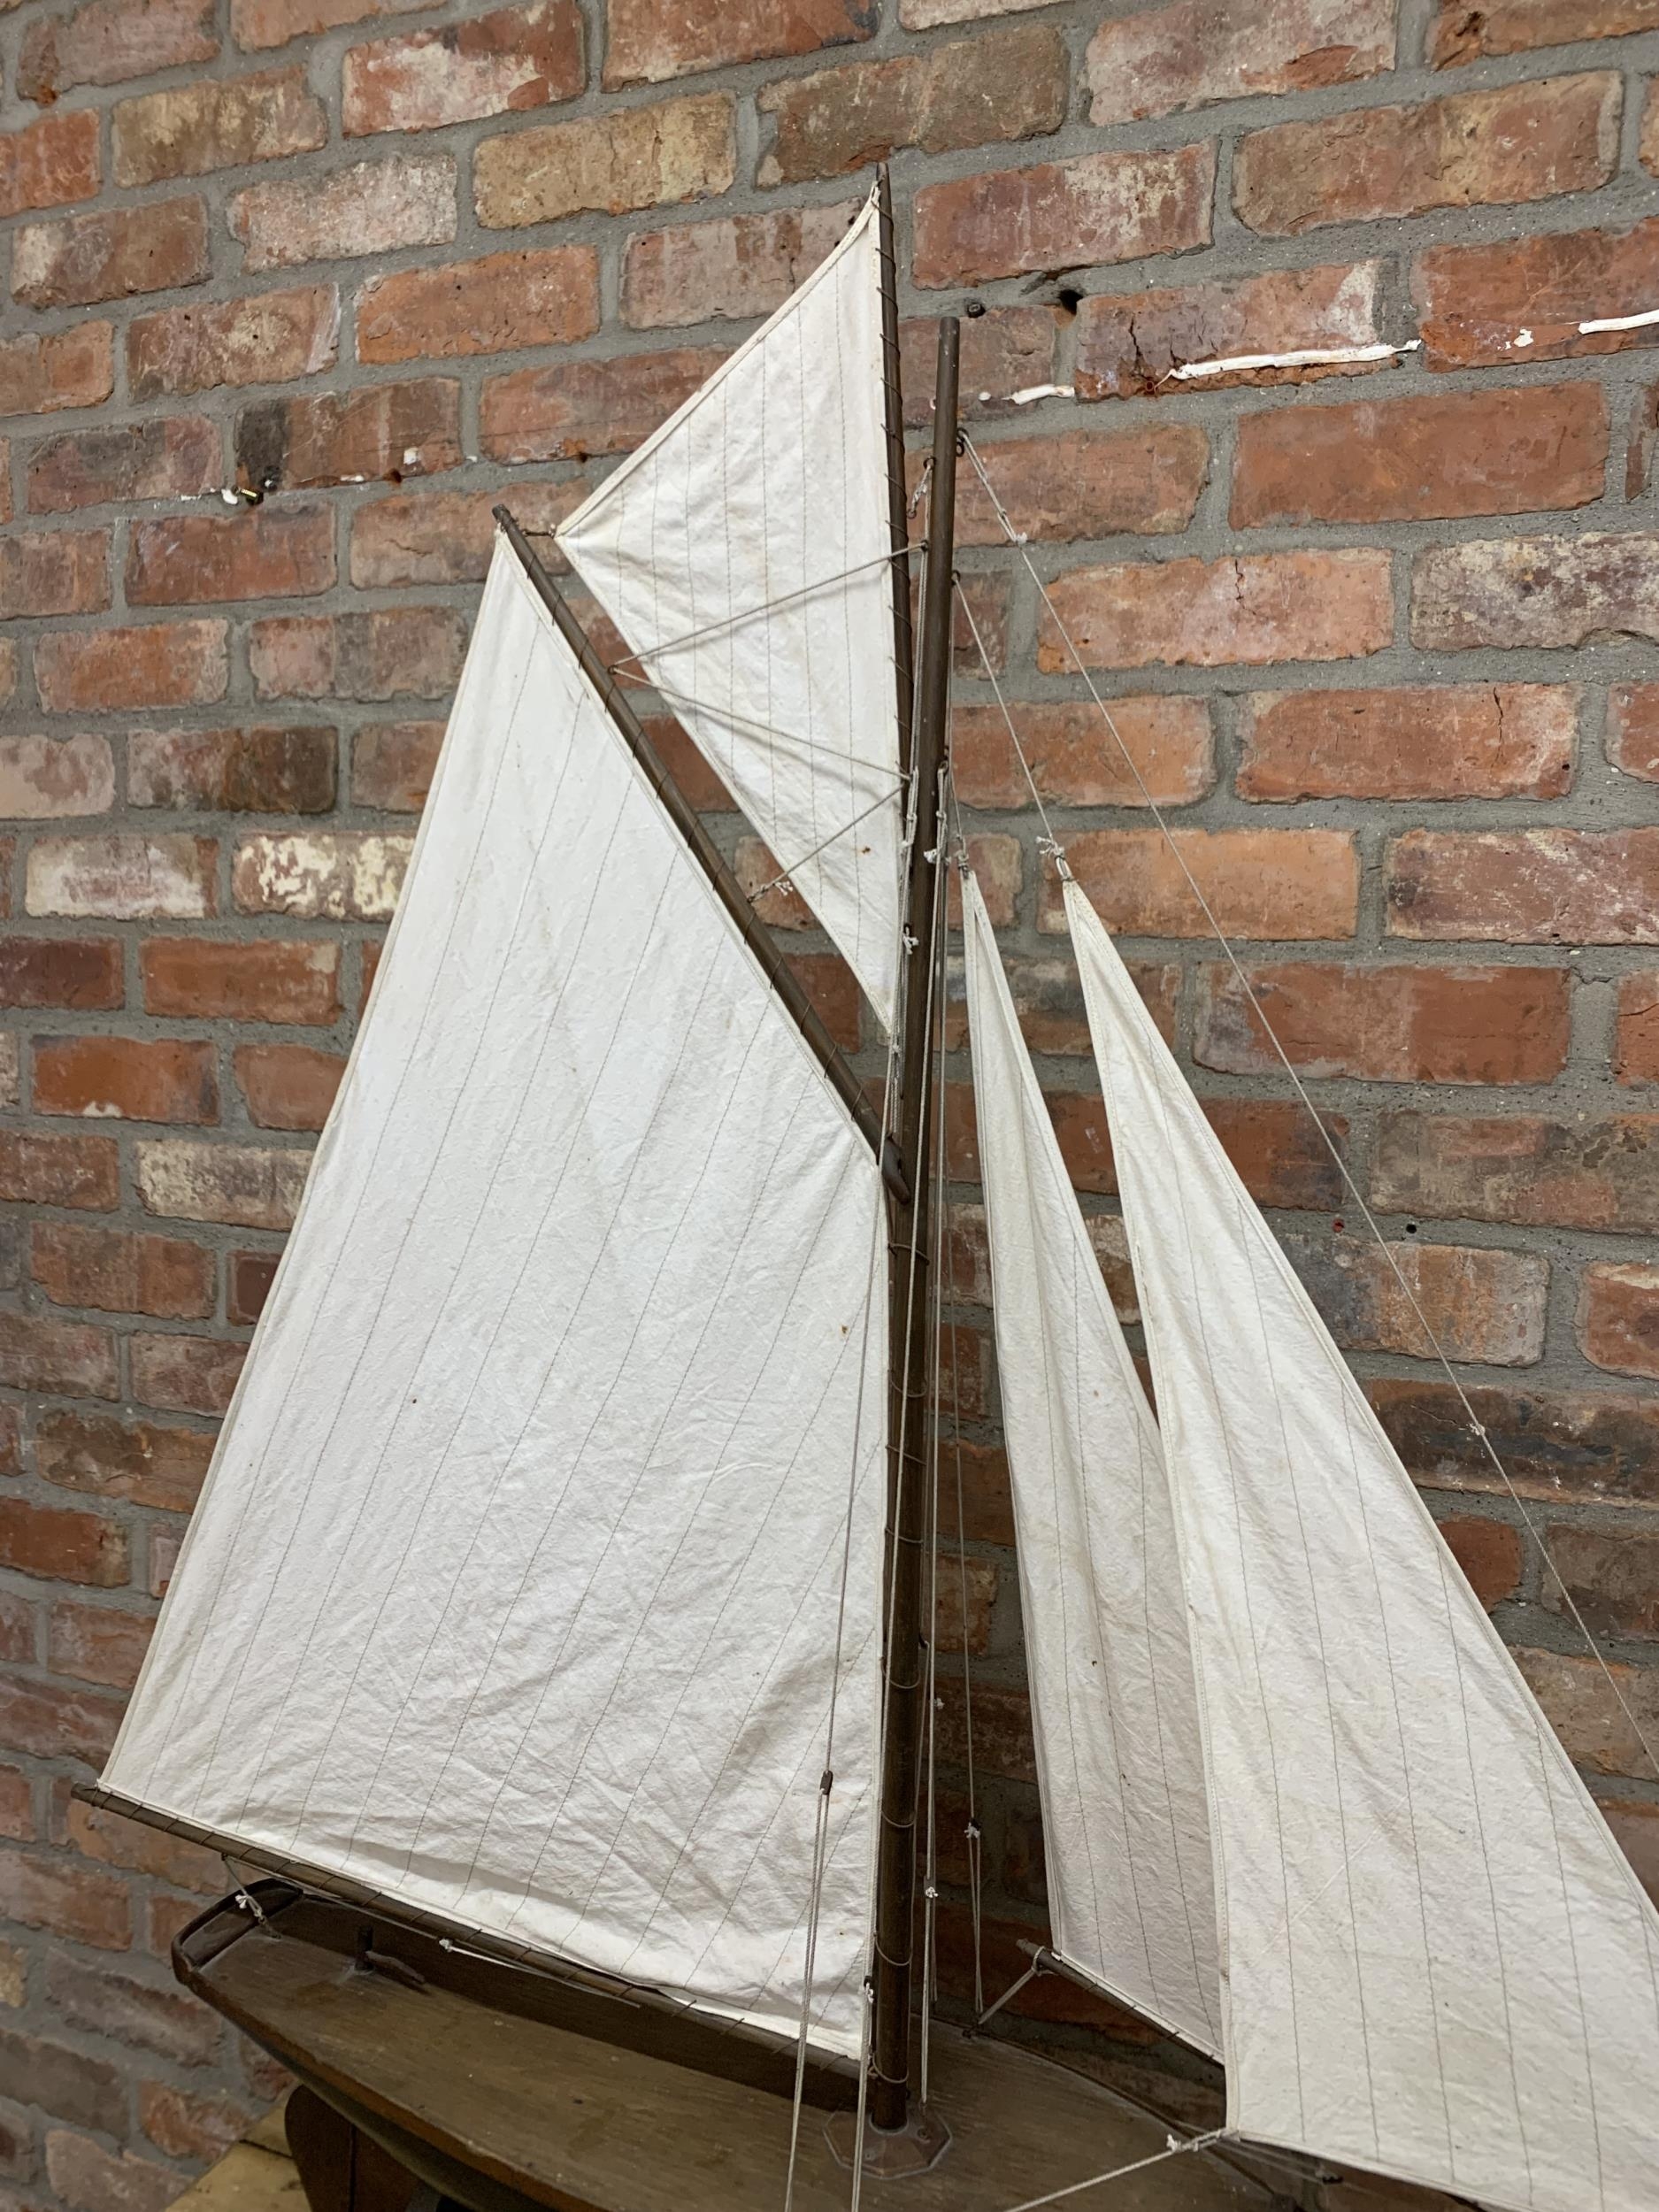 Very large hand built wooden pond yacht with original hand knotted linen sails, mounted atop - Image 3 of 4